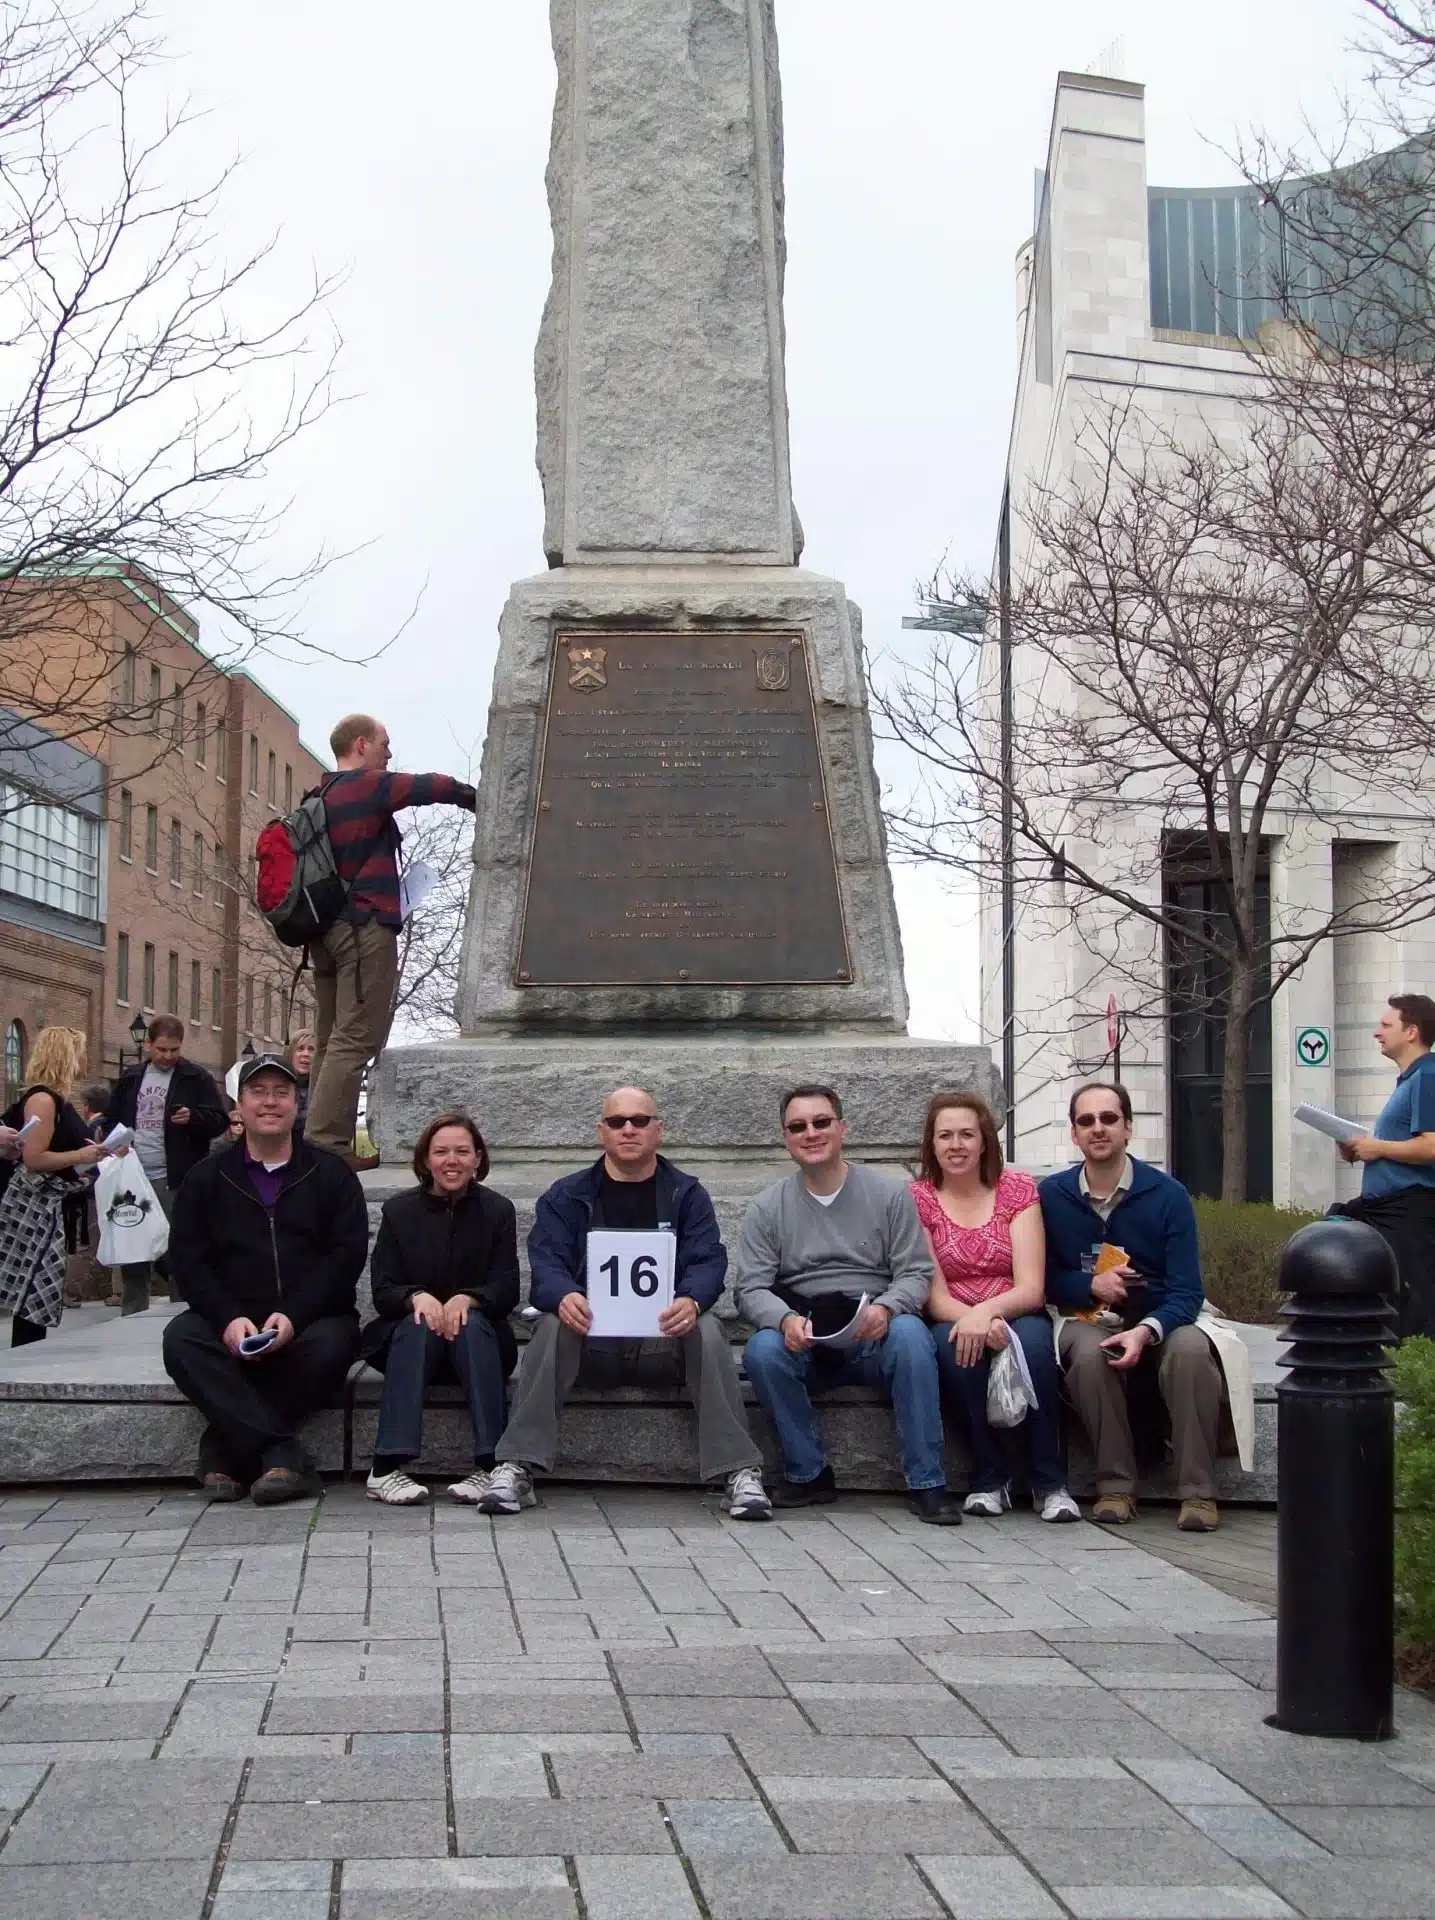 Six people in front of a monument in Old Montreal